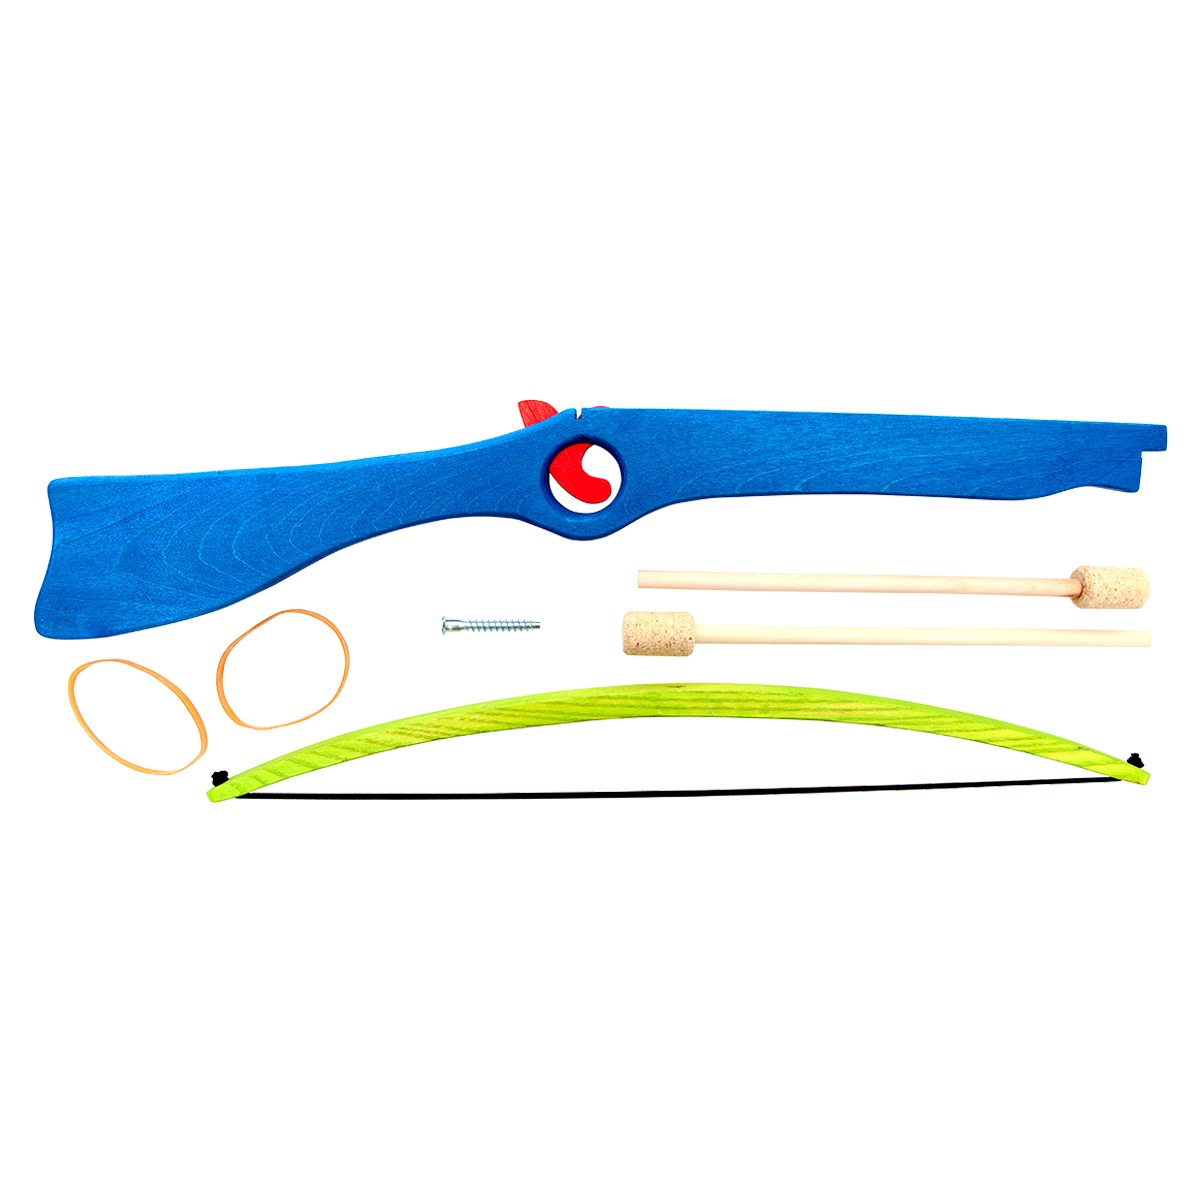 Different components and parts of our blue wooden toy crossbow with cork arrows